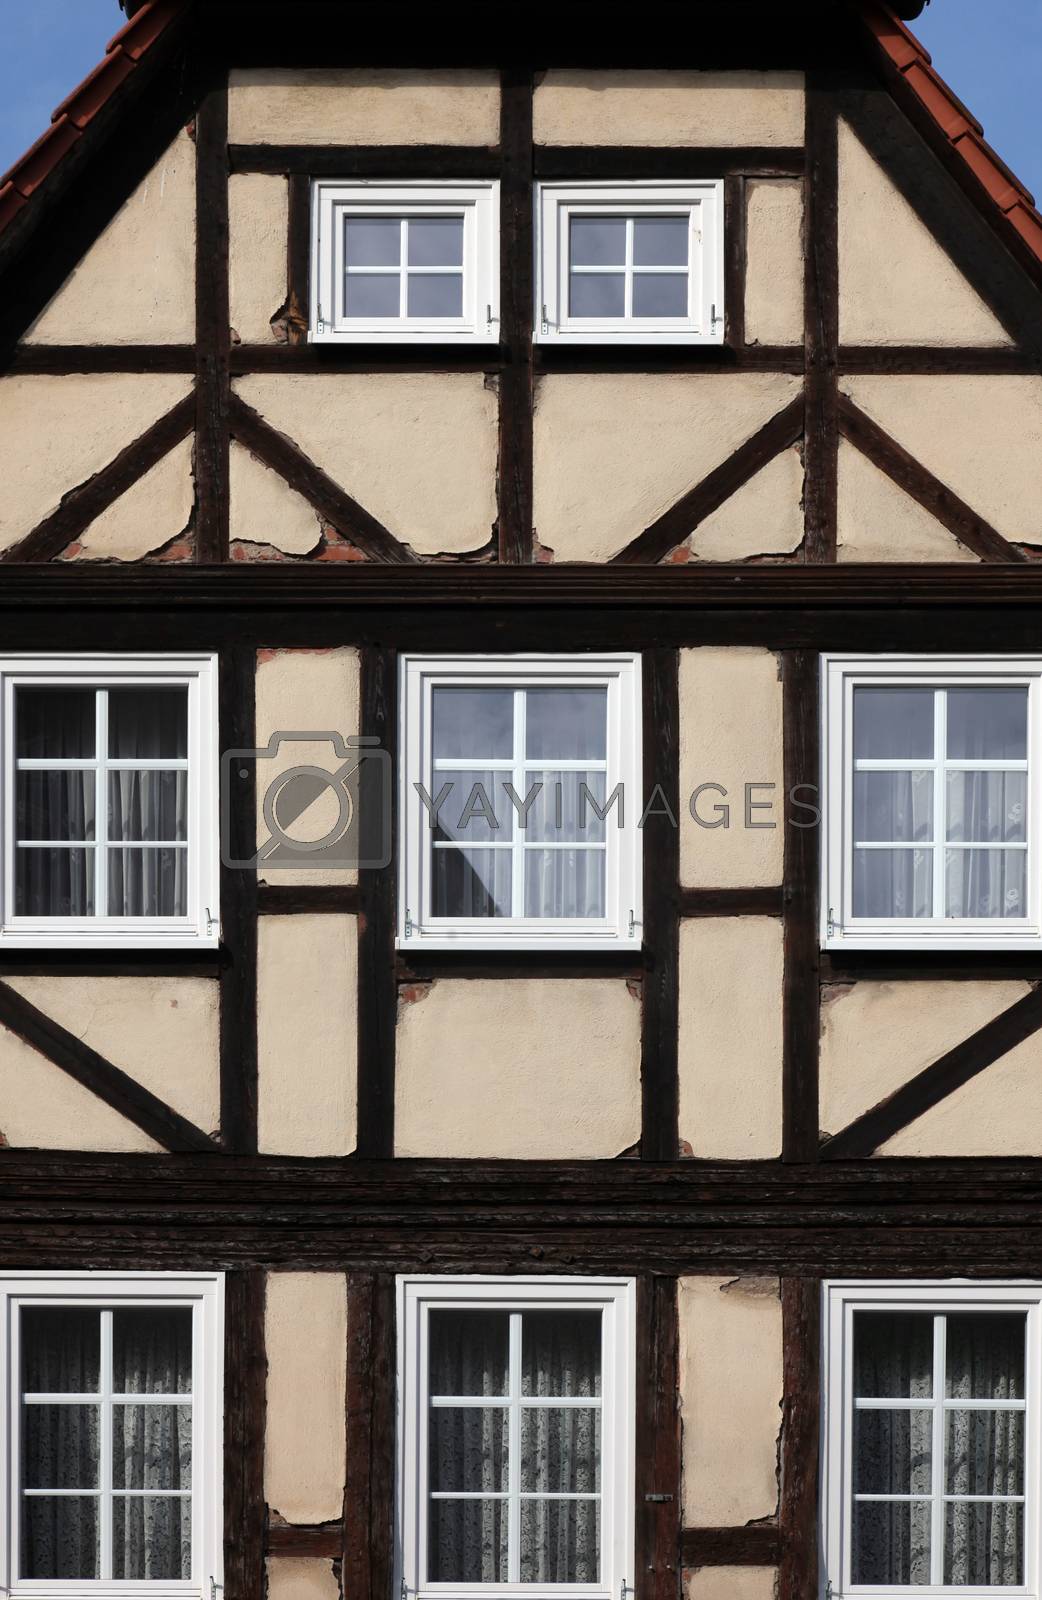 Royalty free image of Half-timbered old house in Gemunden, Germany by atlas